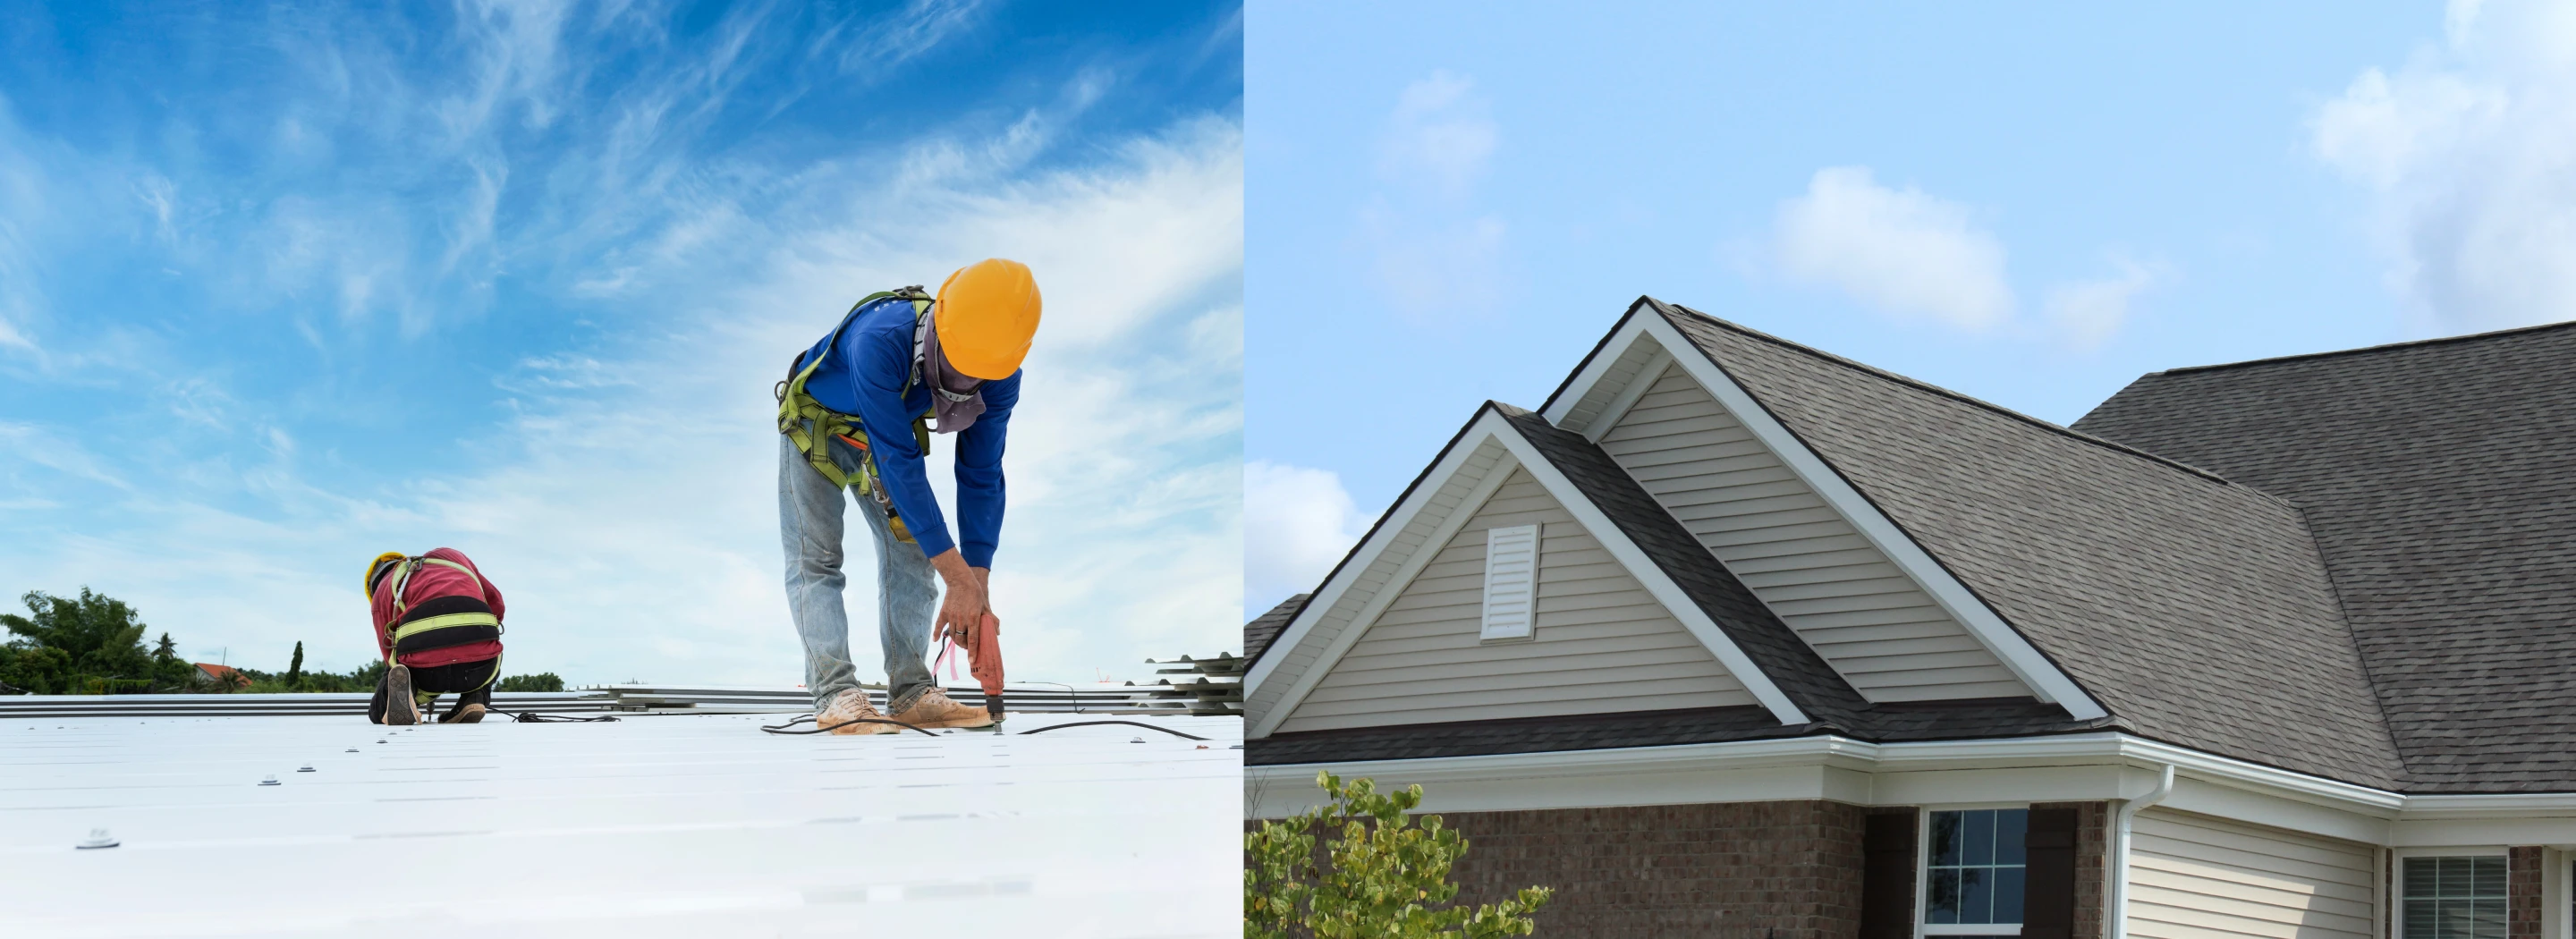 Residential Roofing Services Seattle